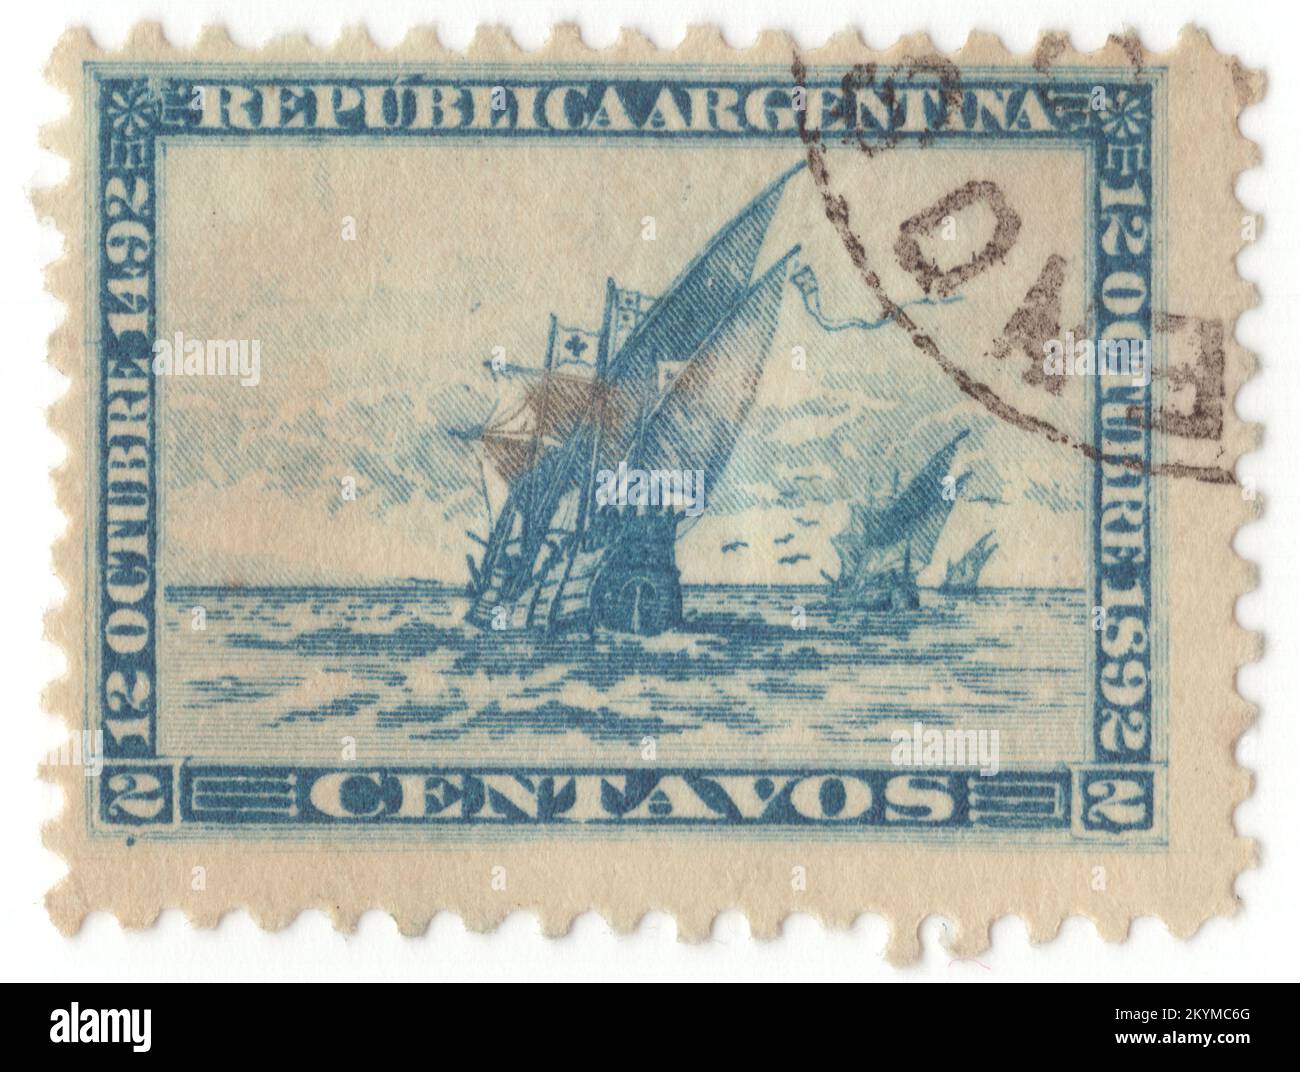 ARGENTINA - 1892 October 12: 2 centavos light blue postage stamp depicting Christopher Columbus fleet — 'Santa Maria', 'Nina' and 'Pinta'. Discovery of America, 400th anniversary. Spain sponsored a major exploration led by Italian explorer Christopher Columbus in 1492; it quickly led to extensive European colonization of the Americas Stock Photo